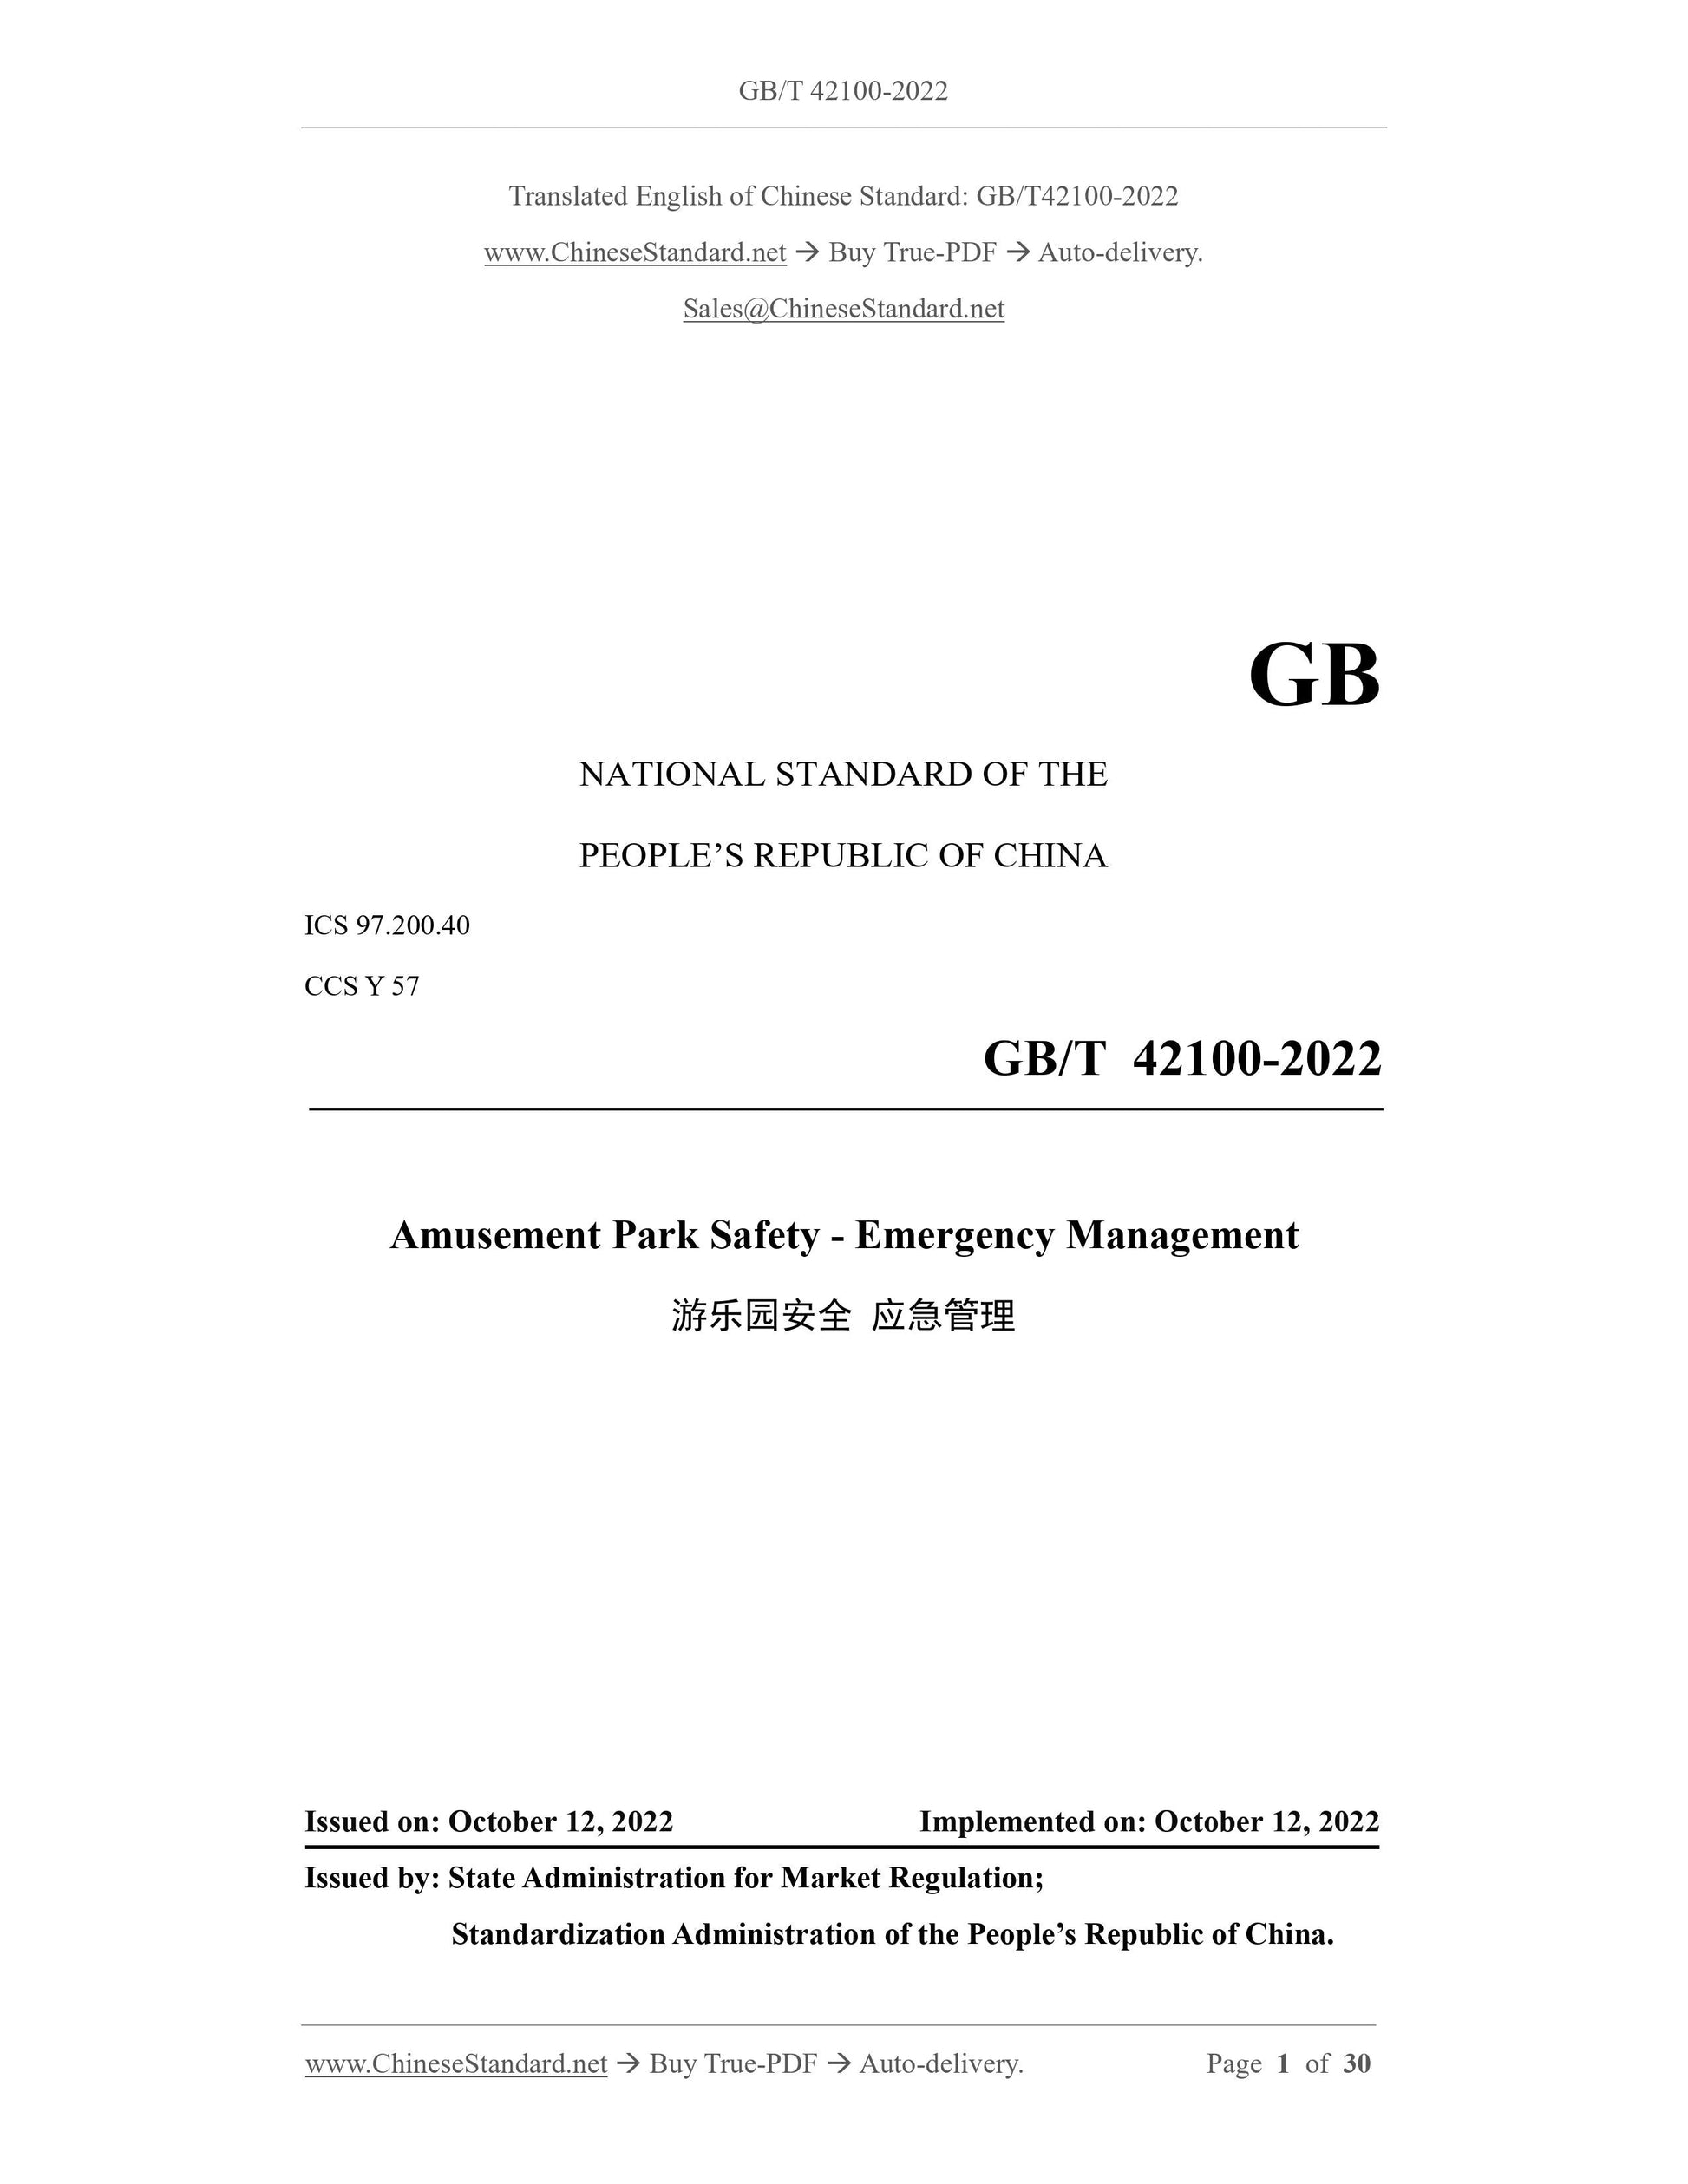 GB/T 42100-2022 Page 1